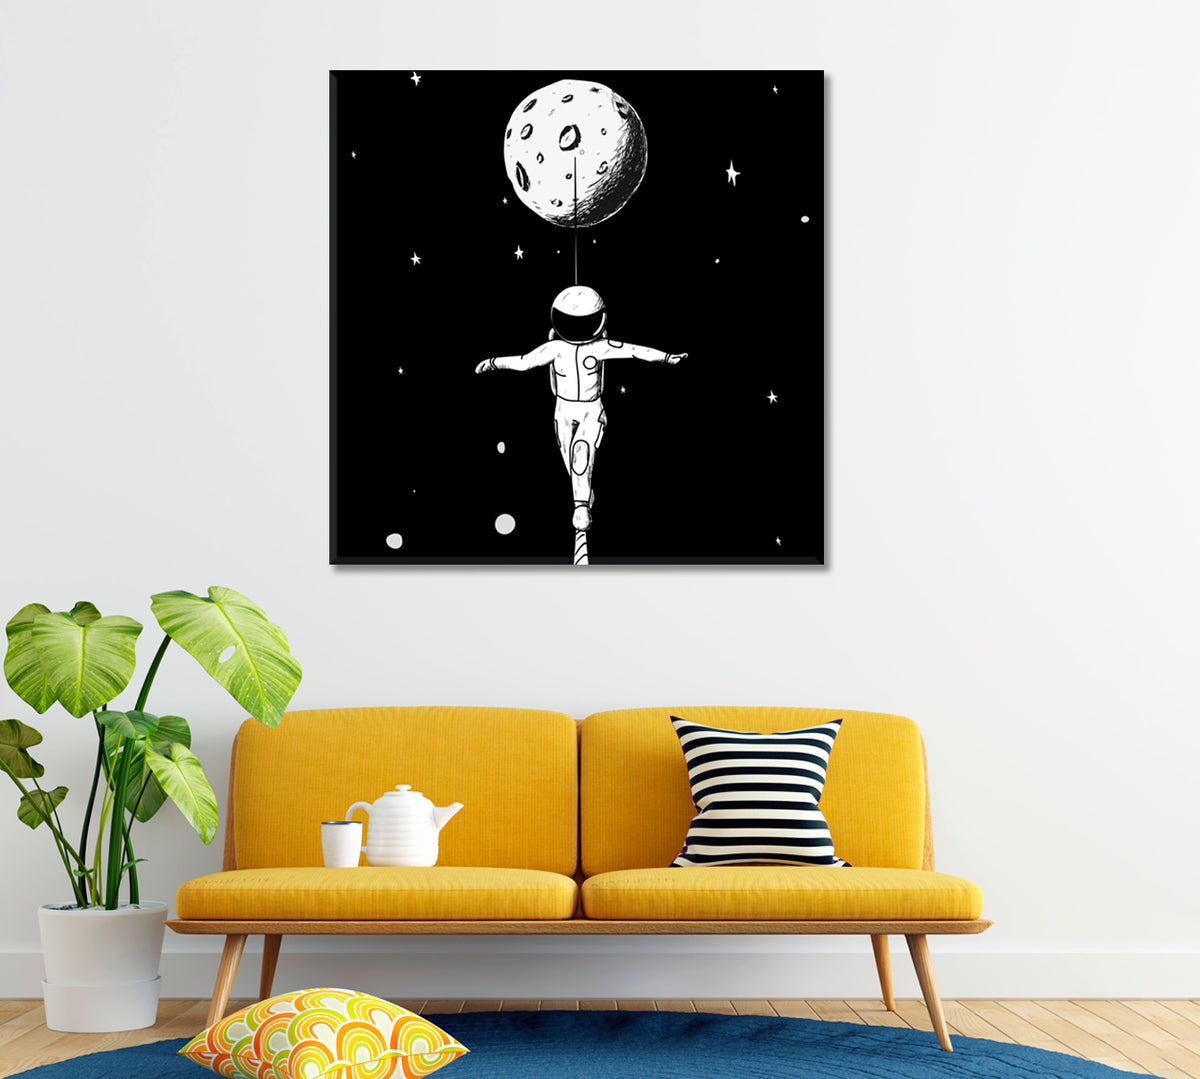 Astronaut Walking a Tightrope in Space Canvas Print ArtLexy 1 Panel 12"x12" inches 